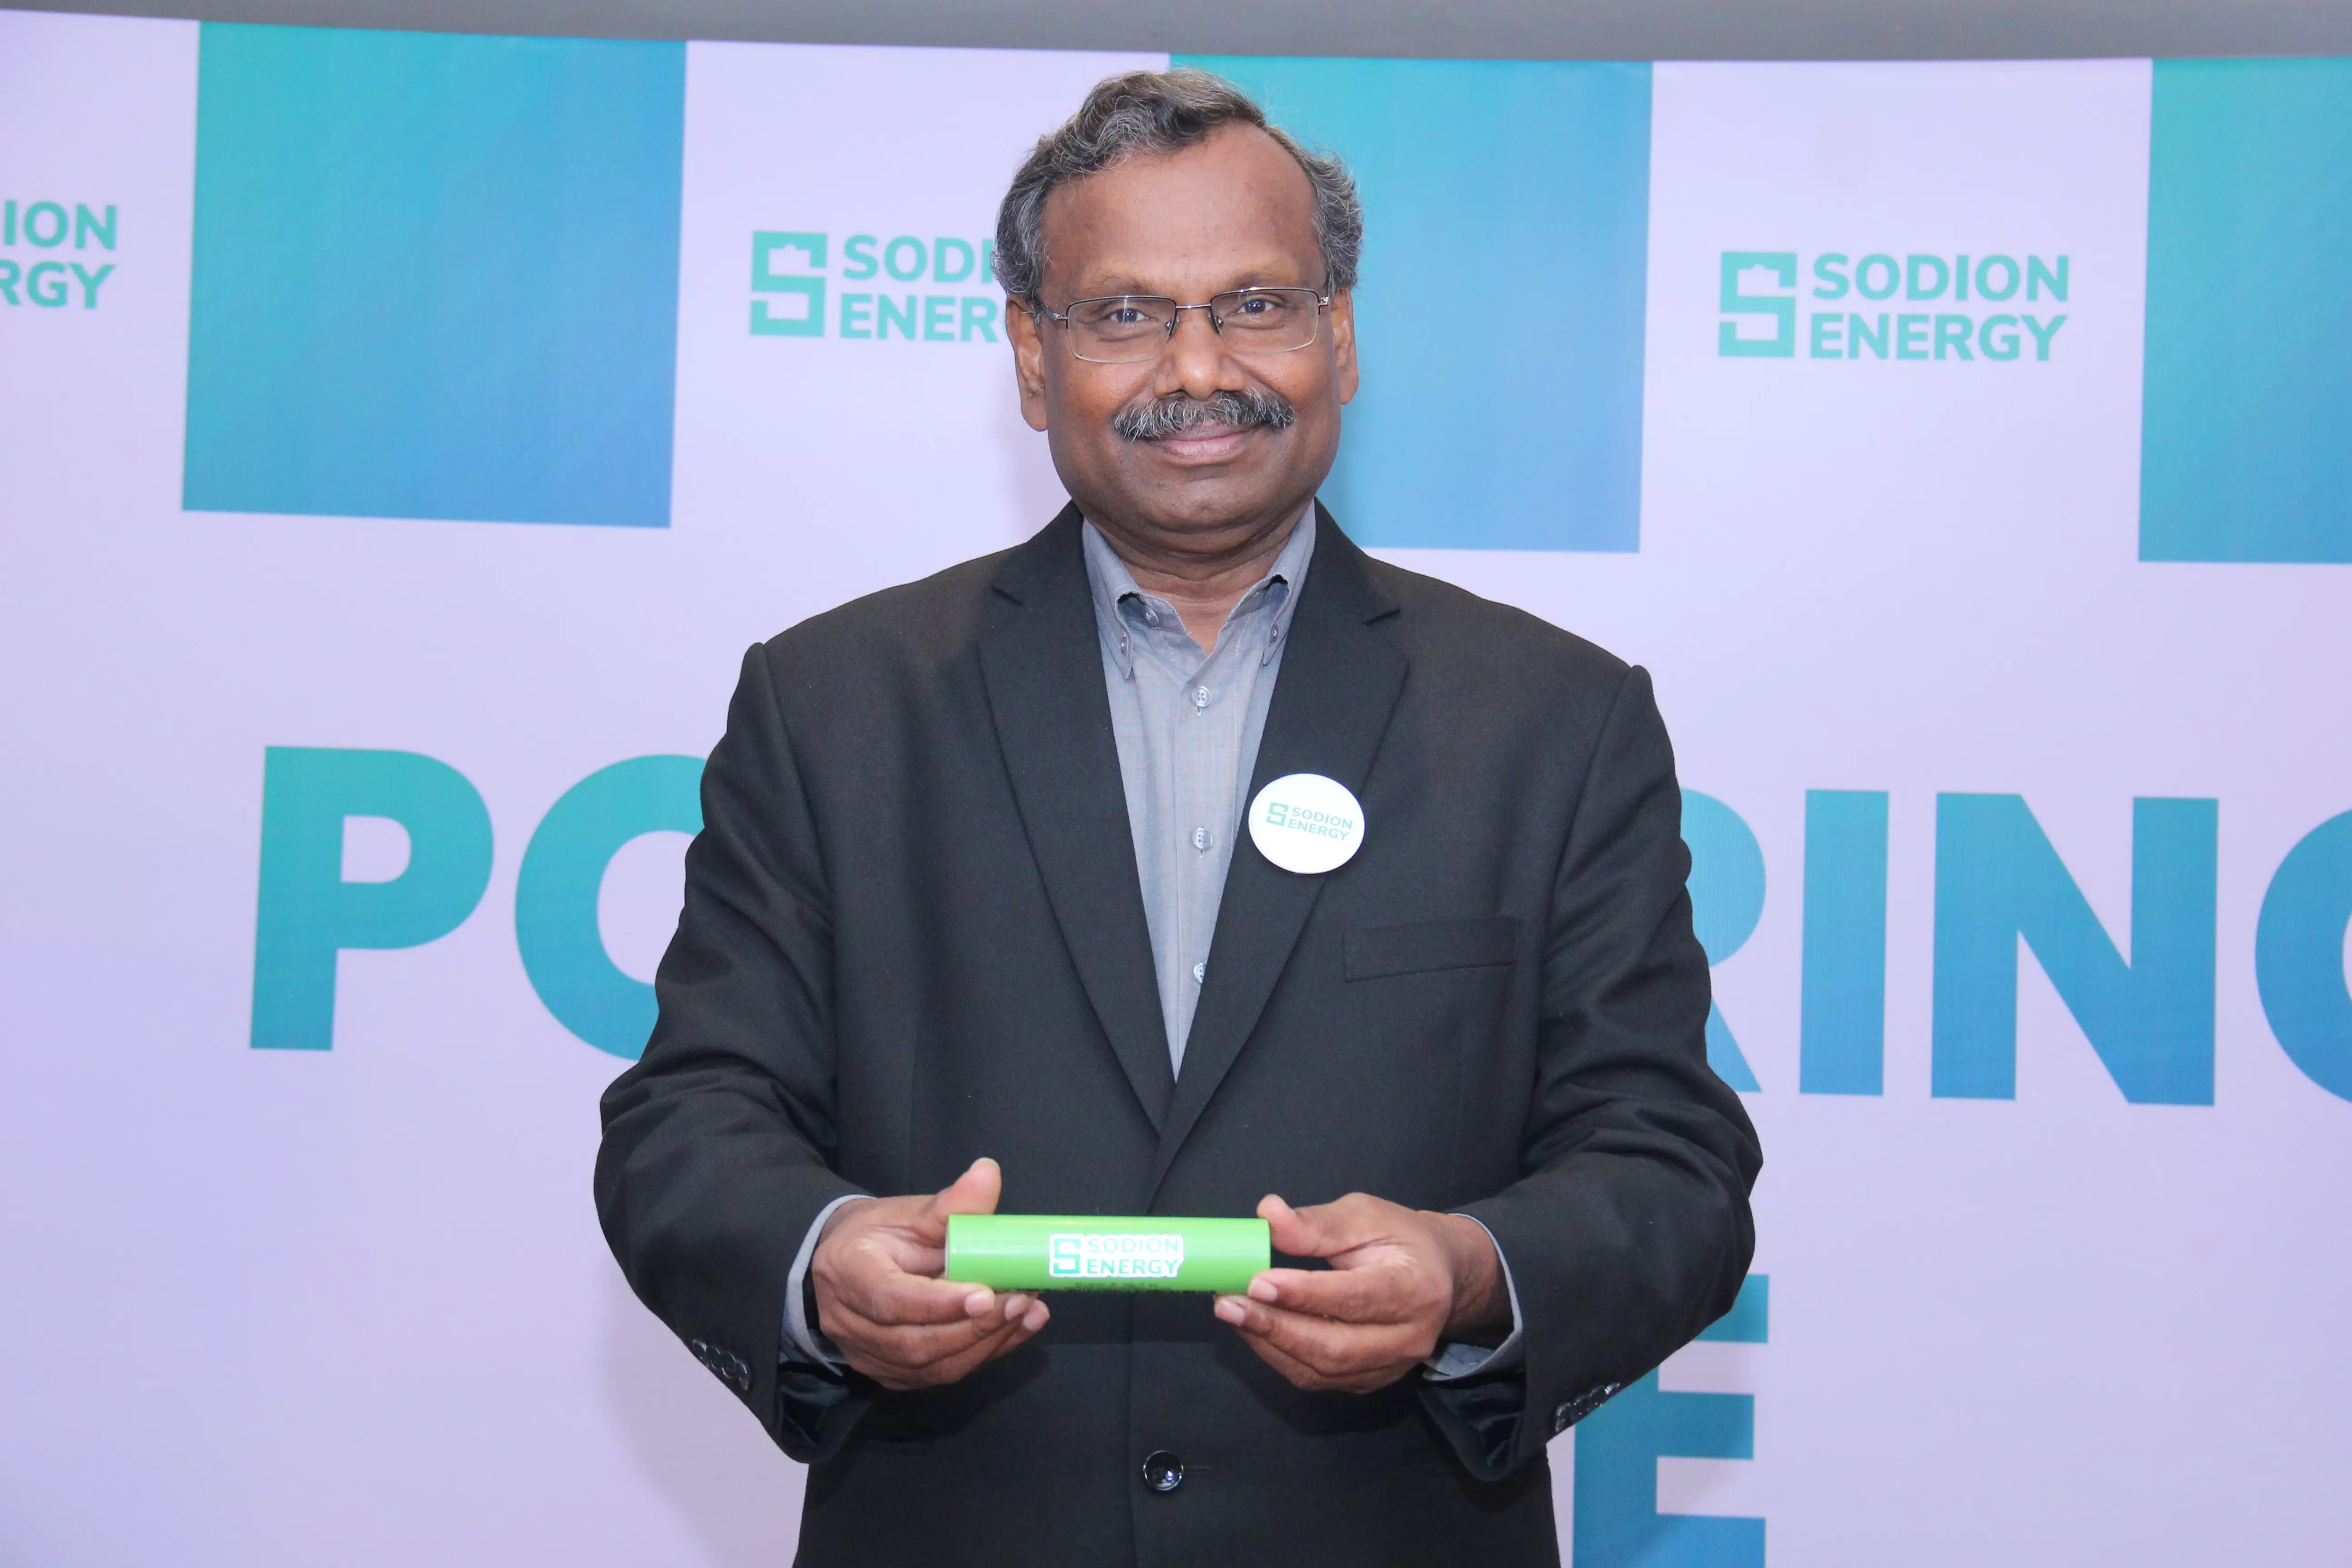 Sodion Energy launches India’s first Sodium Ion battery